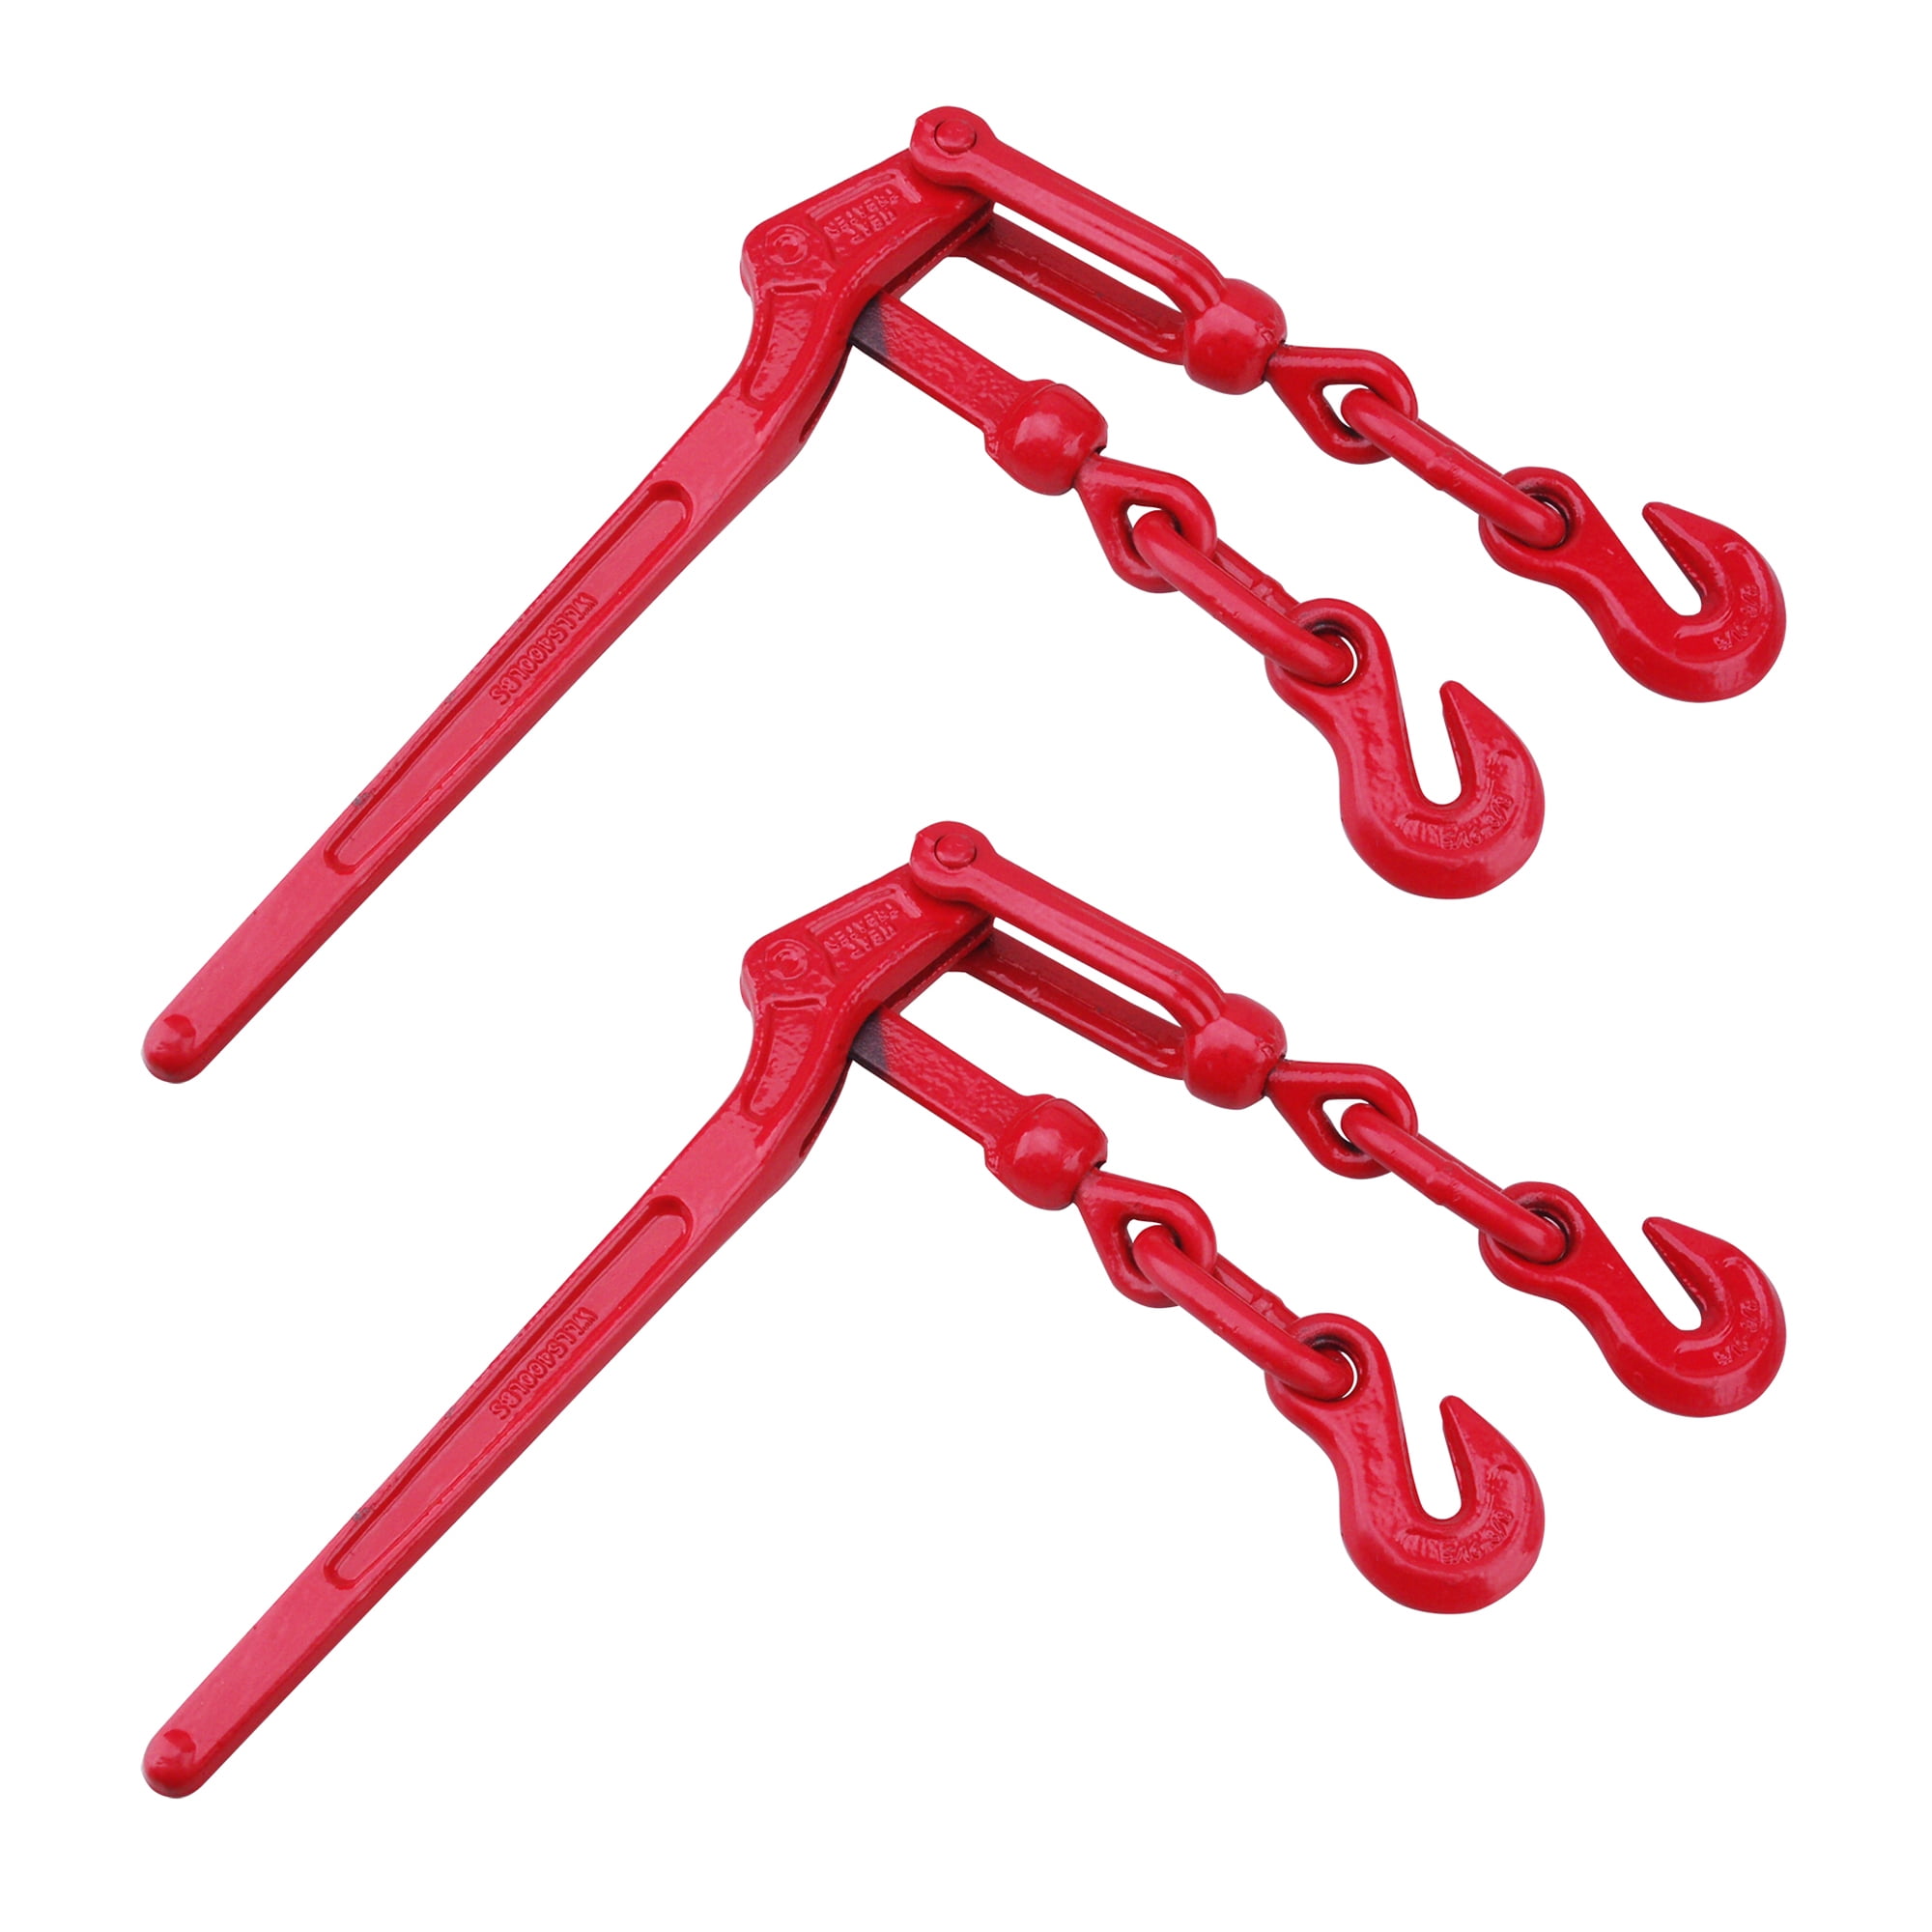 3/8" Chain Hook Tie Down 5/16" 2 Pack 5,400Lb Load Binders Ratcheting Levers 